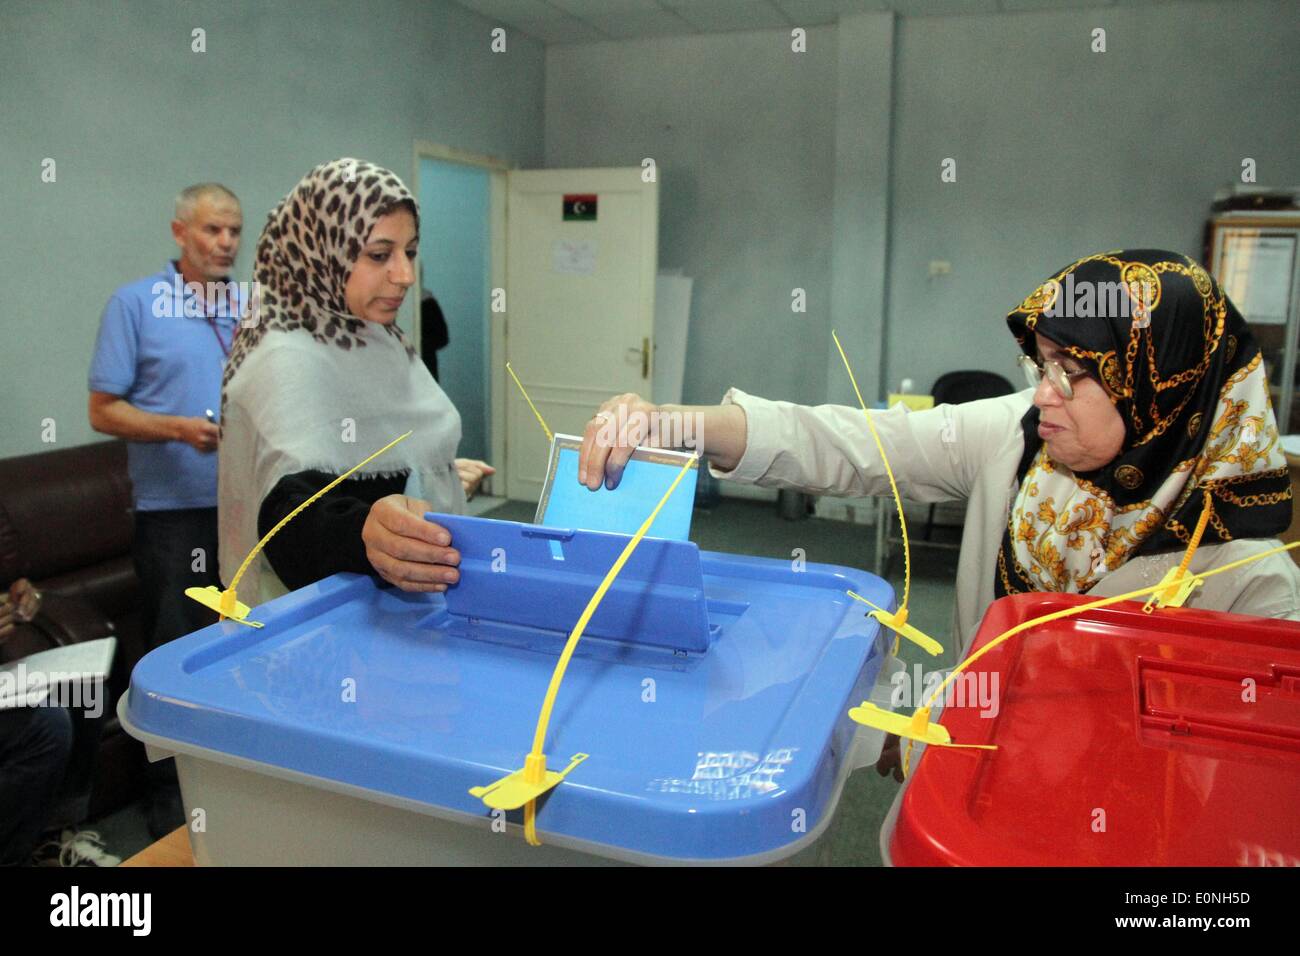 (140517)-- TRIPOLI, May 17, 2014(Xinhua)-- Citizens cast their ballots in Tripoli Center on May 17, in Tripoli, Libya. Voters in Libya's capital Tripoli cast their ballots Saturday to elect four new municipal councils, as part of a gradual electoral process that began several months ago. (Xinhua/Hamza Turkia) Stock Photo